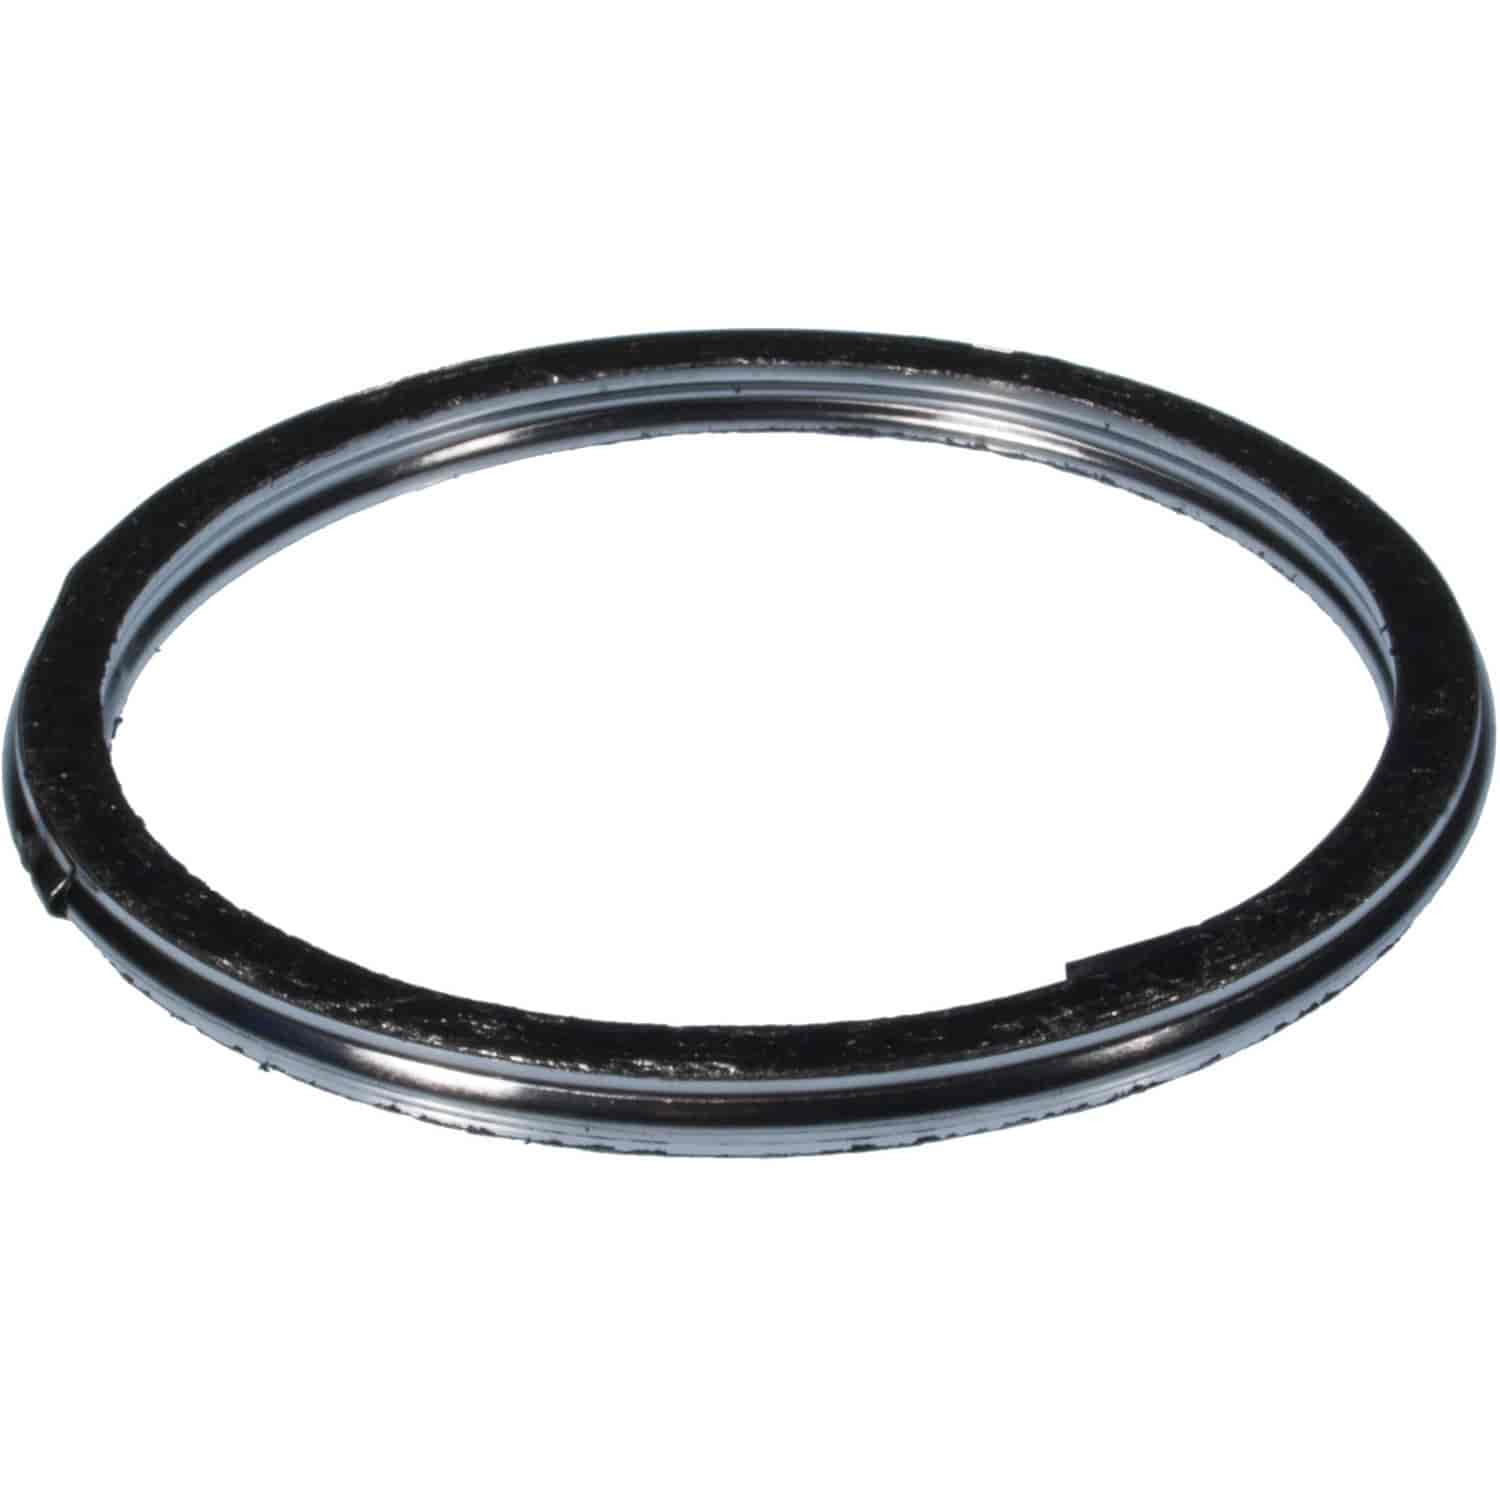 Exhaust Pipe Packing Ring FORD-CAR 3.0L DOHC 24V DURATEC 2000-2002 TAURUS SABLE